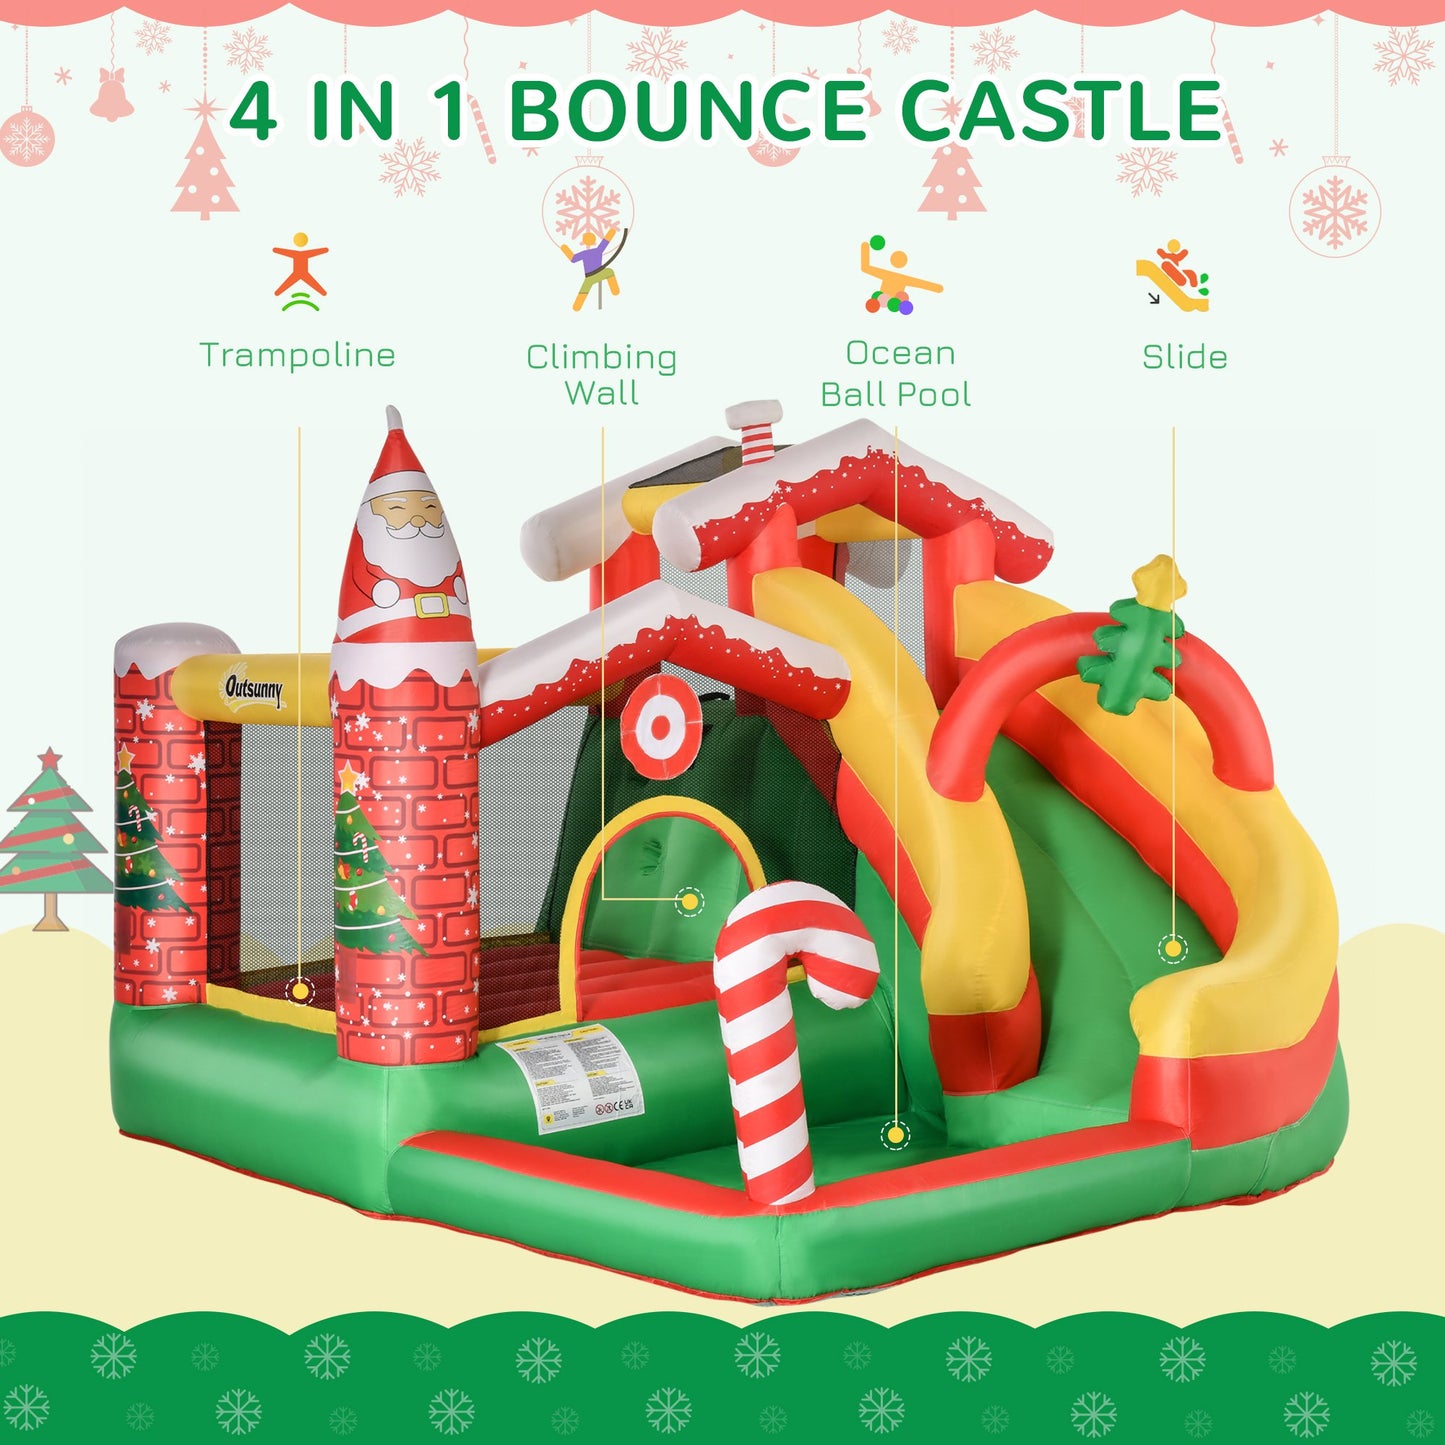 Outsunny Kids Bounce Castle Inflatable House Trampoline Slide Water Pool Climbing Wall 4 in 1 with Inflator Carrybag for Kids Age 3-8